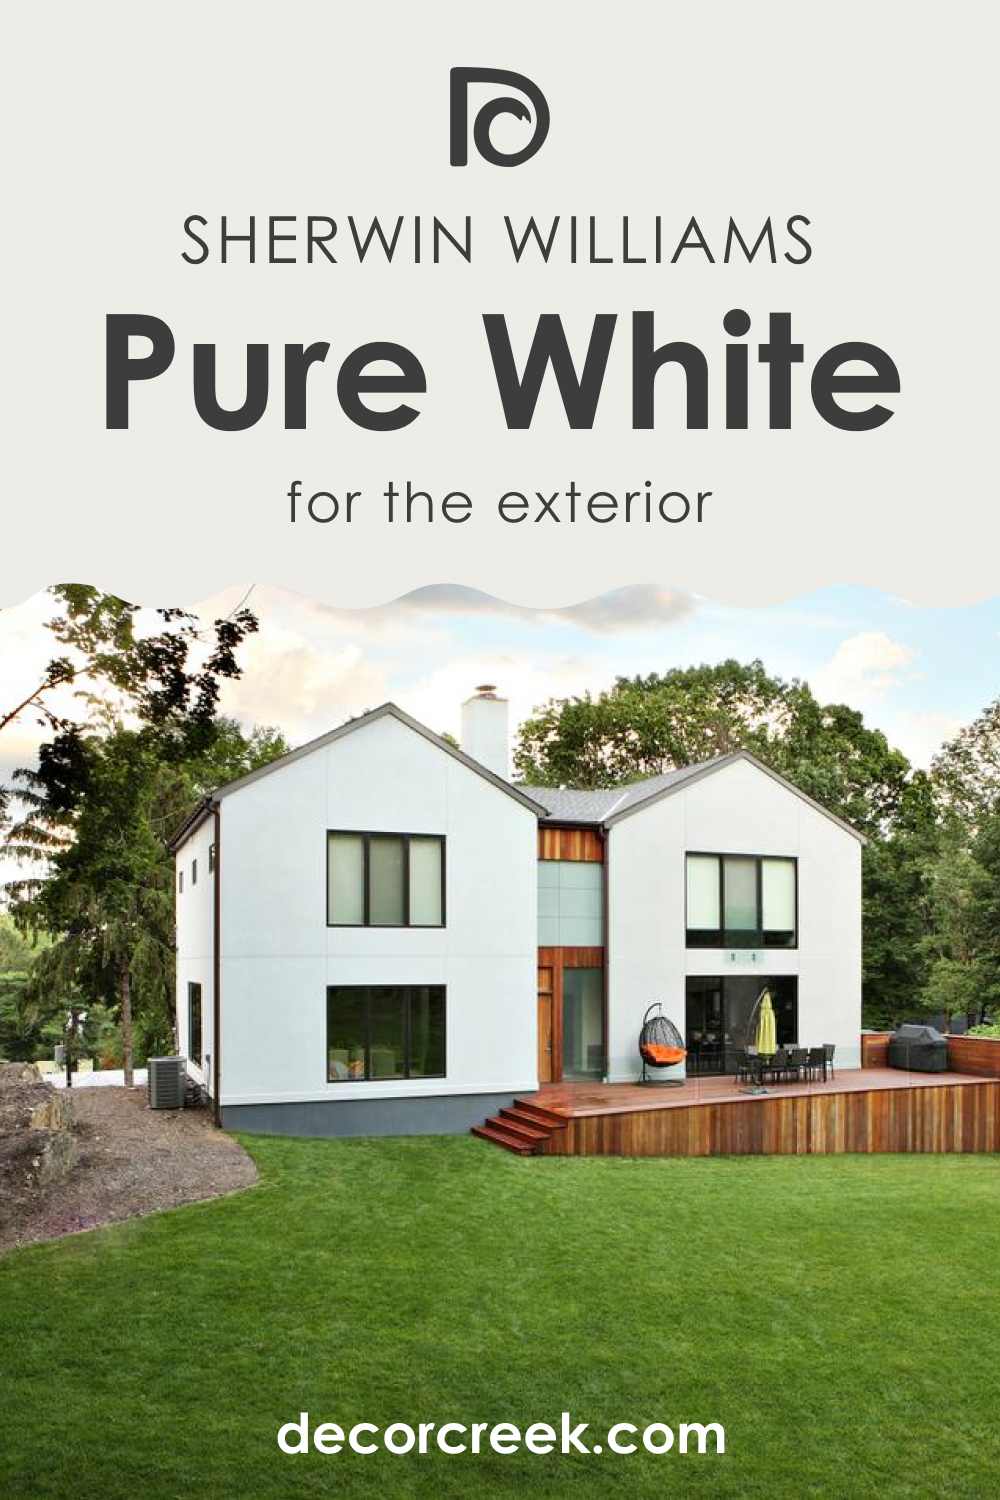 How to Use Pure White SW 7005 for an Exterior?